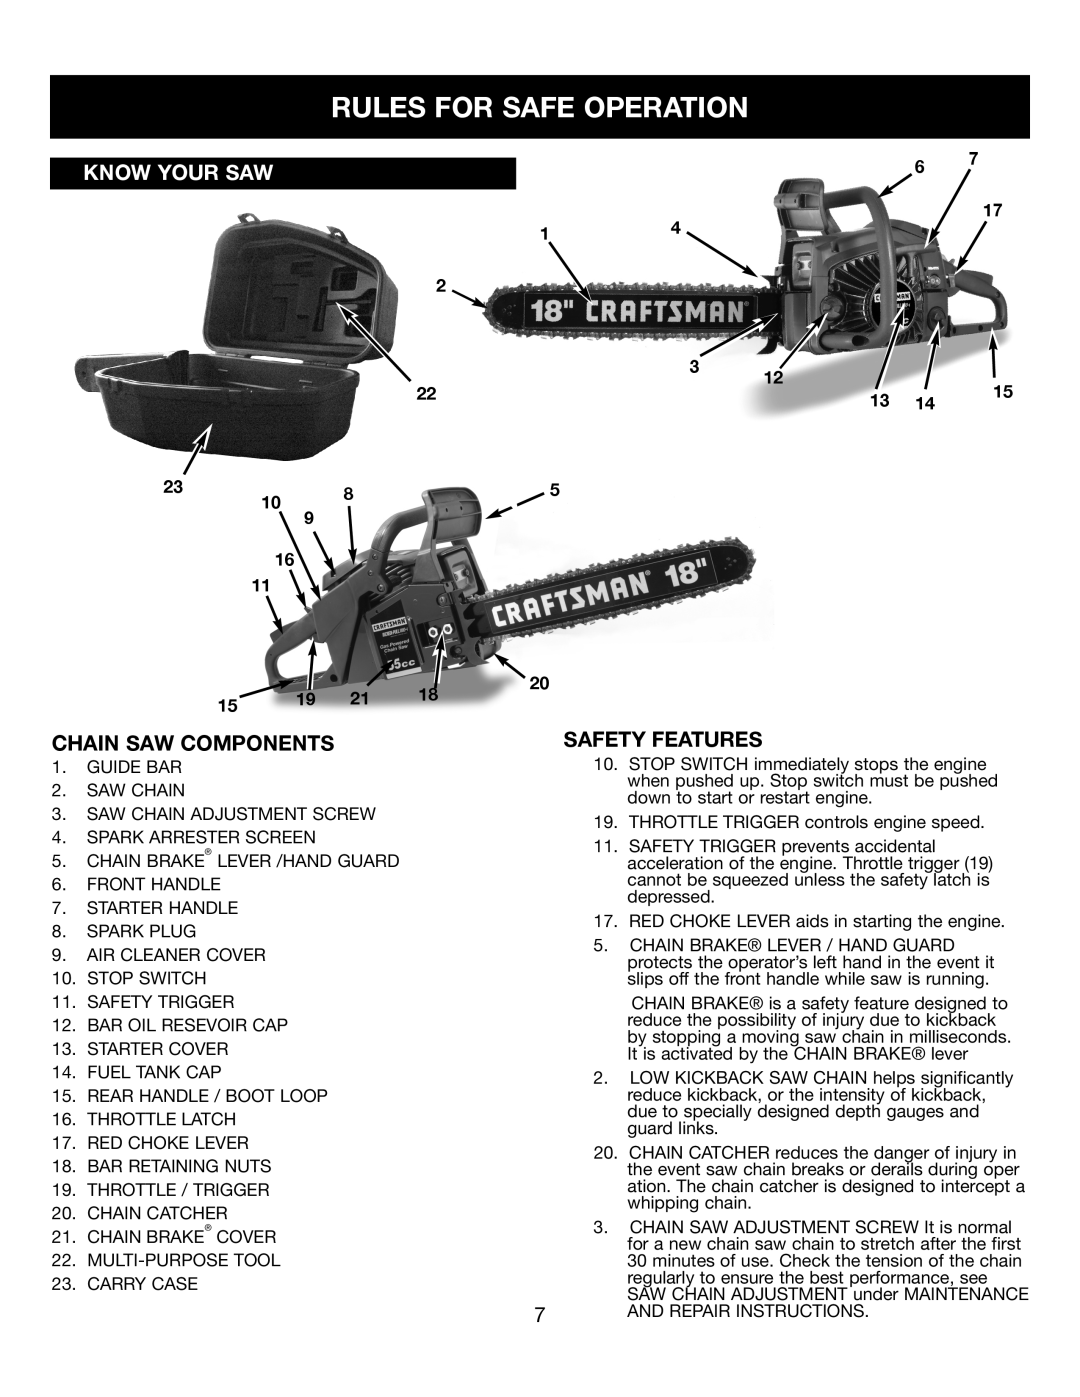 Craftsman 316350840 manual Rules For Safe Operation, Know Your Saw, Chain Saw Components, Safety Features 